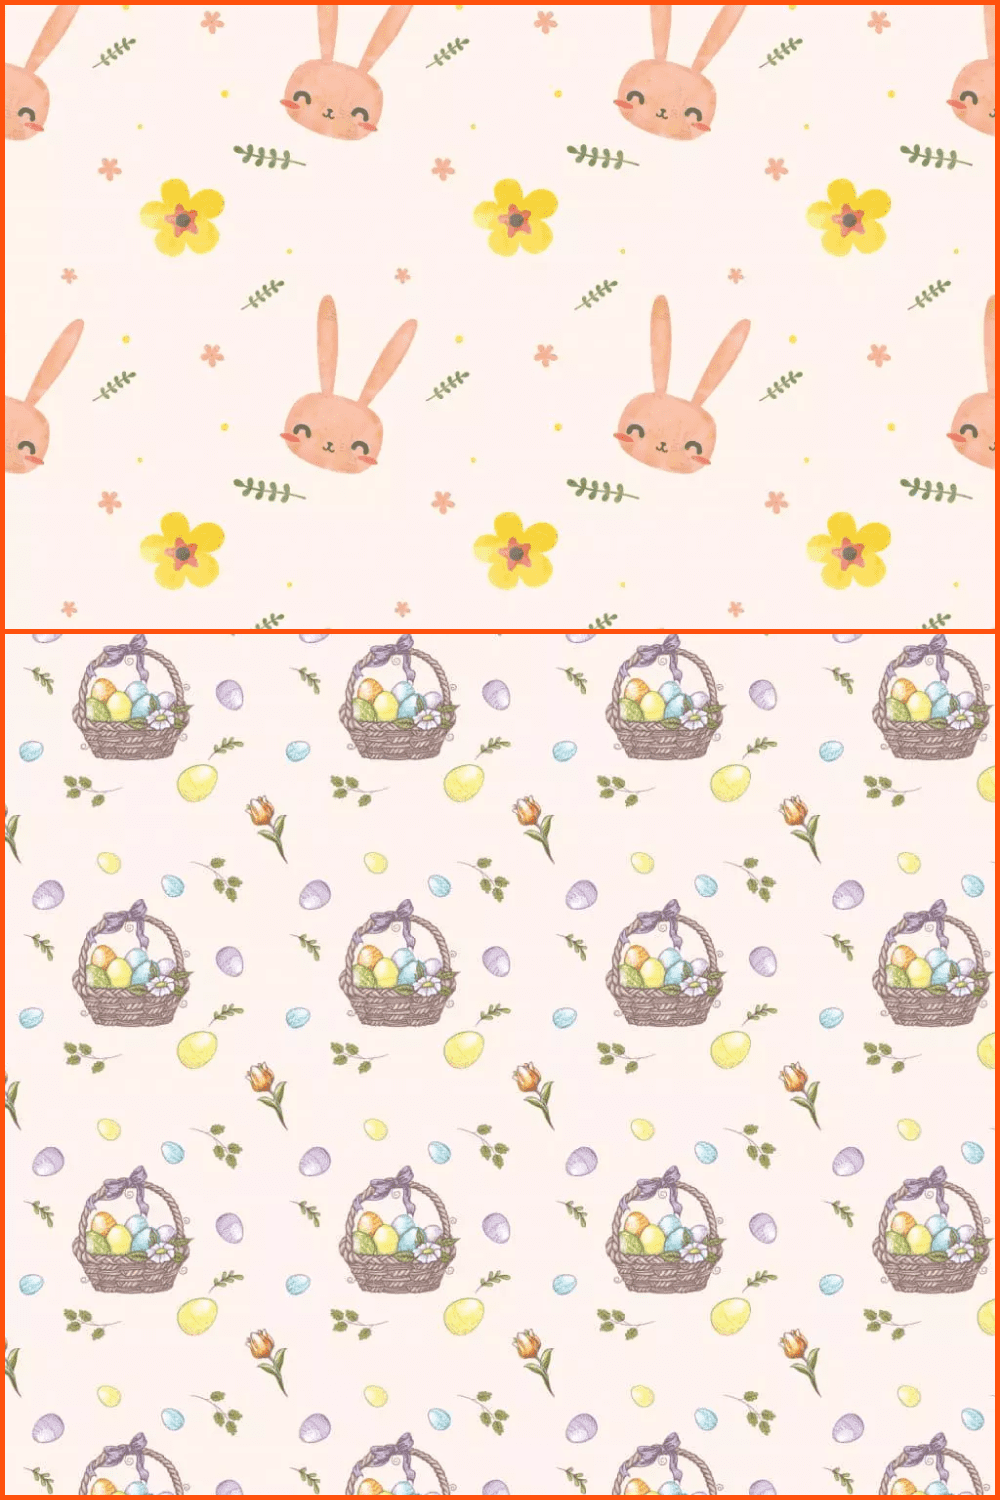 Patterns in the form of Easter eggs, rabbits, flowers and baskets with eggs.